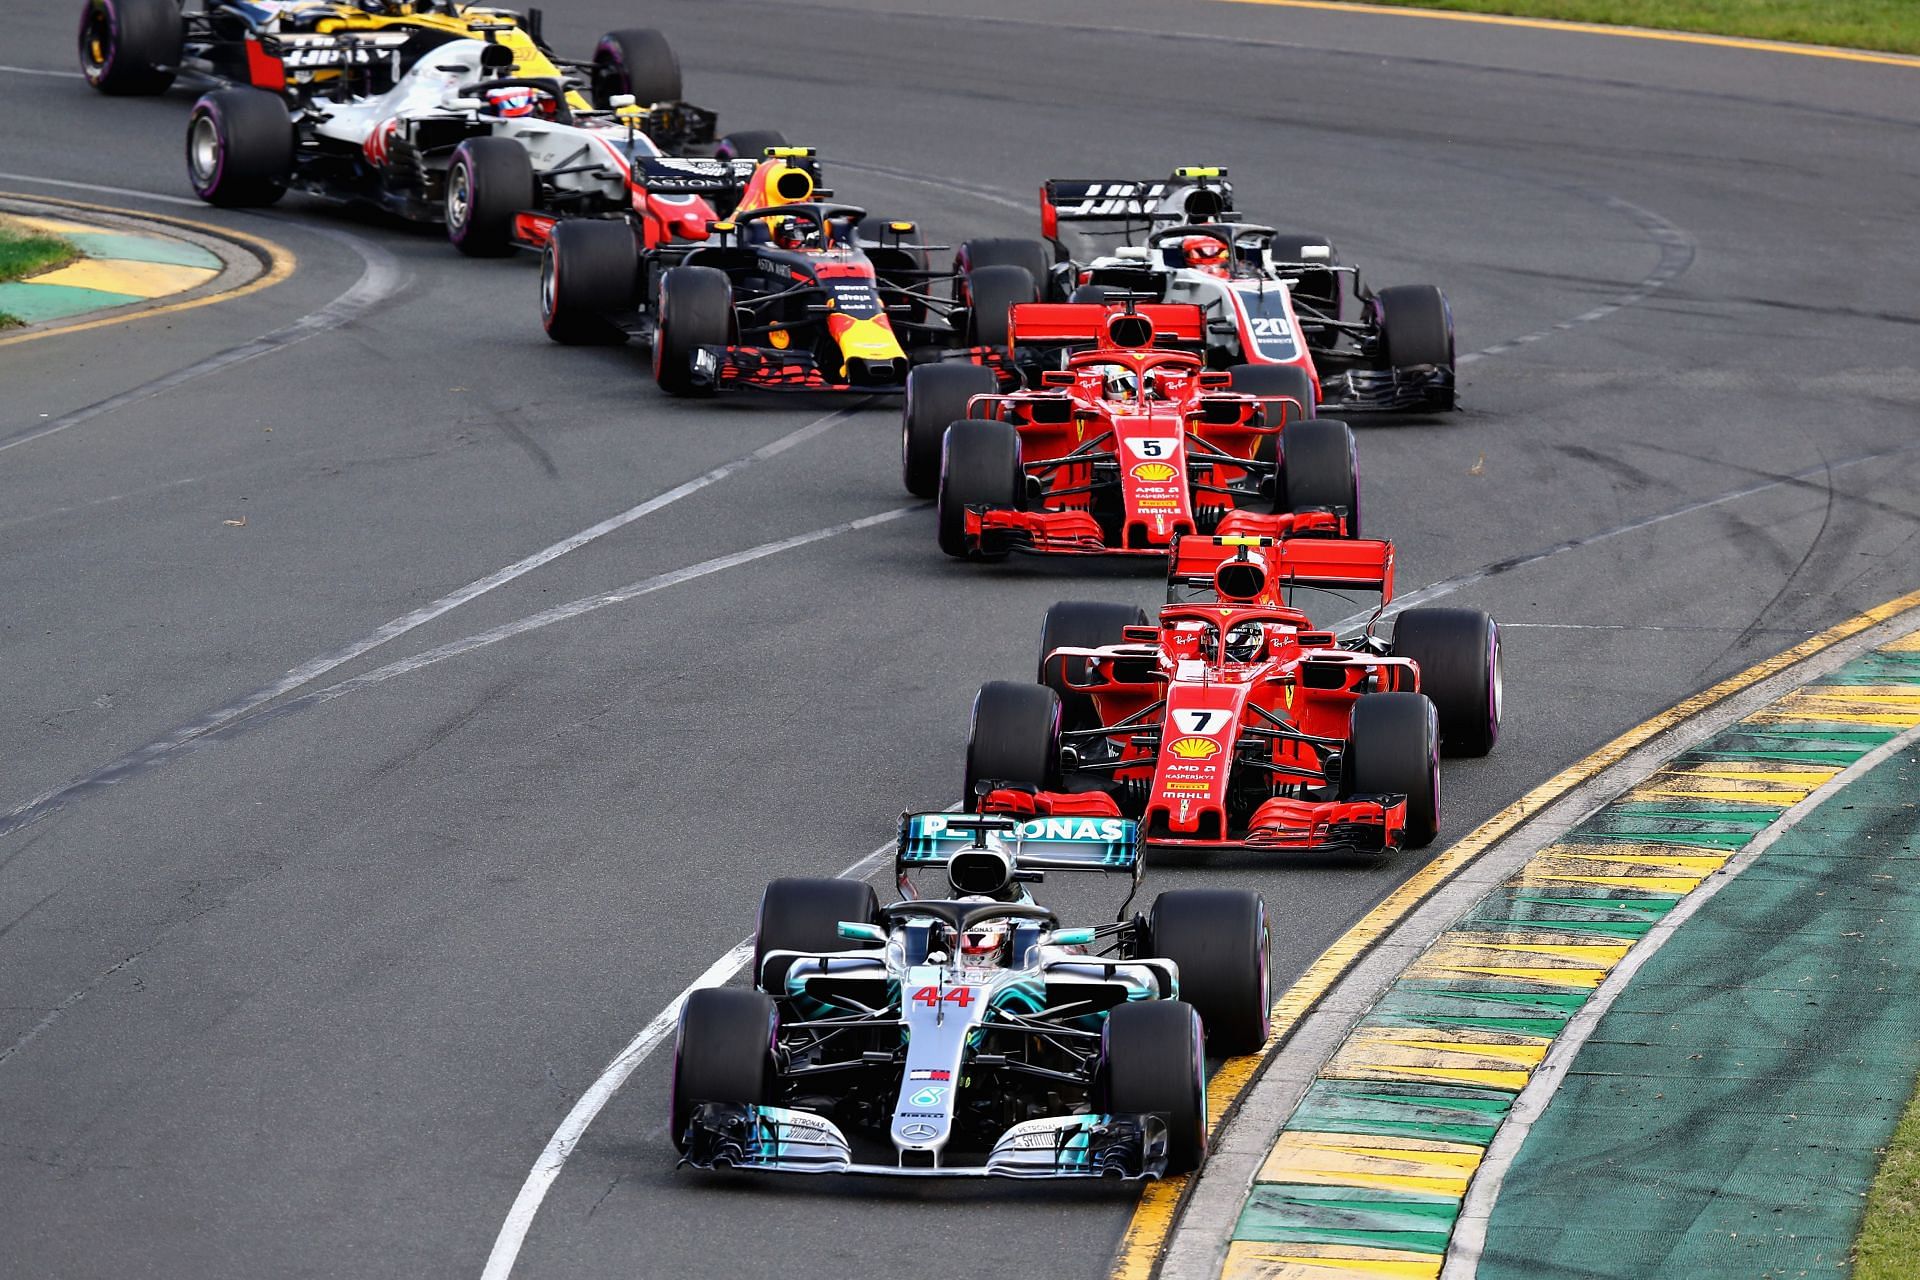 F1 2022 Where to watch Australian GP Race? Time, TV schedule, livestream details, and more